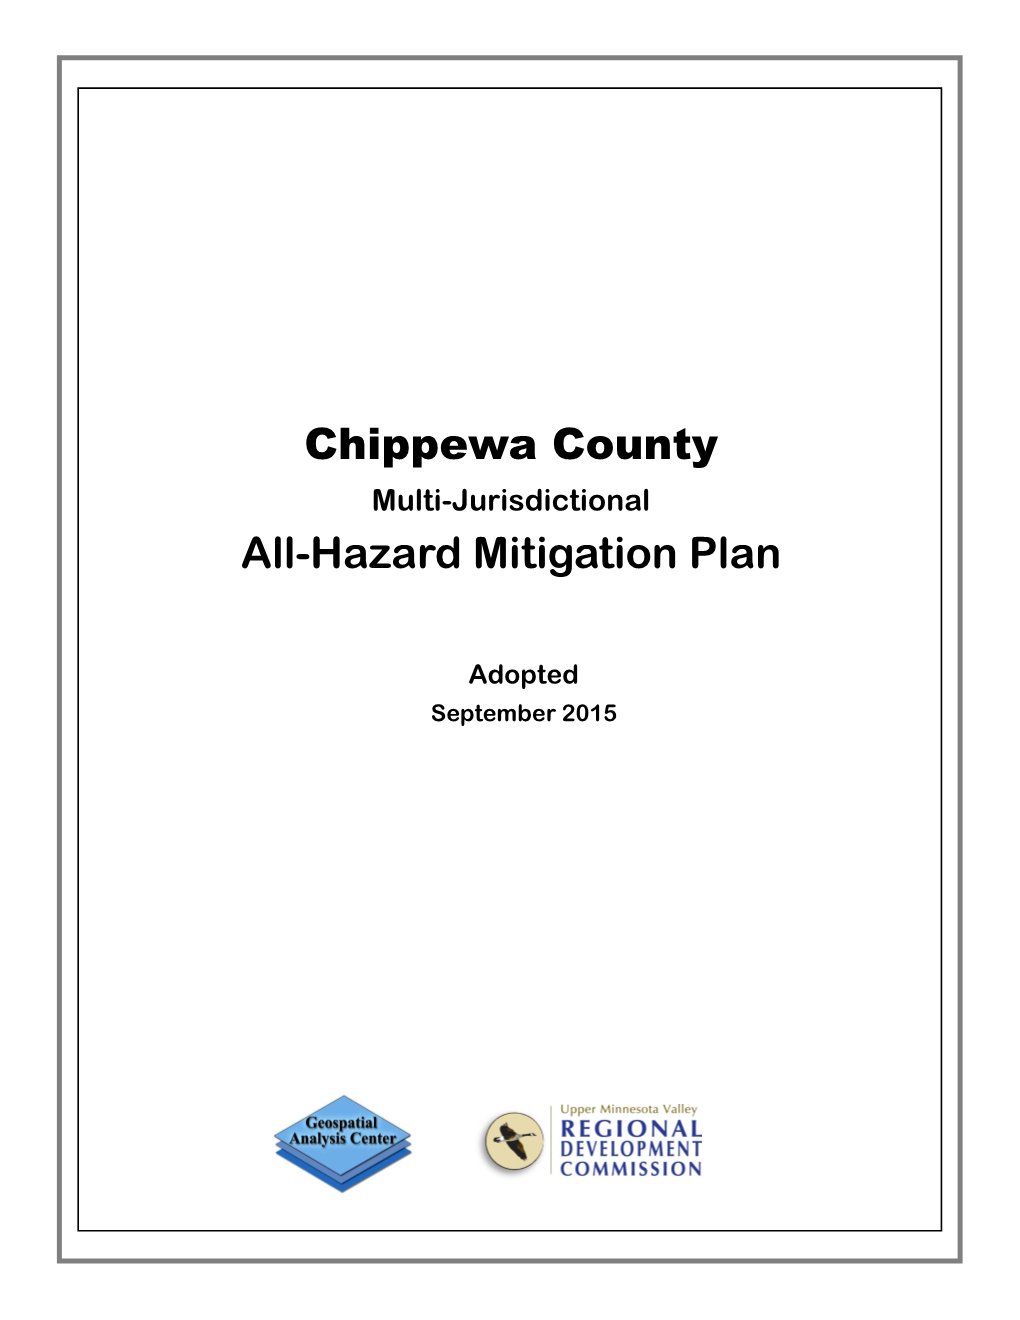 Chippewa County All-Hazard Mitigation Plan to Improve Every Chapter of the Plan, with a Large Emphasis on Adding a Hazus Flood Analysis to the Plan